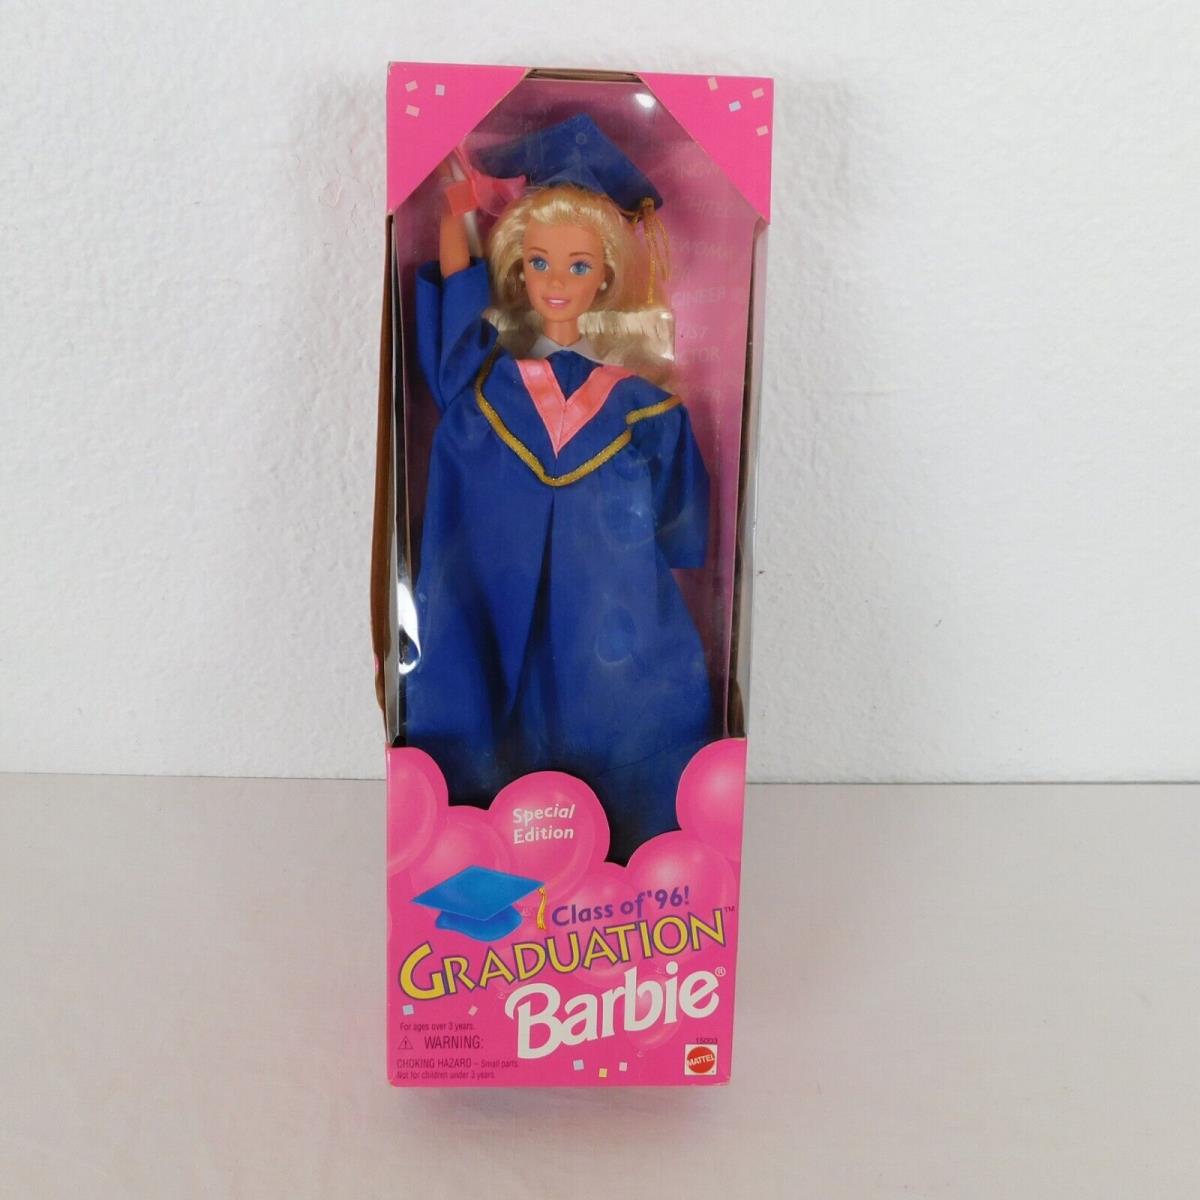 Graduation Barbie Doll Class of 96 Special Edition 1995 Collect Gift Vintage